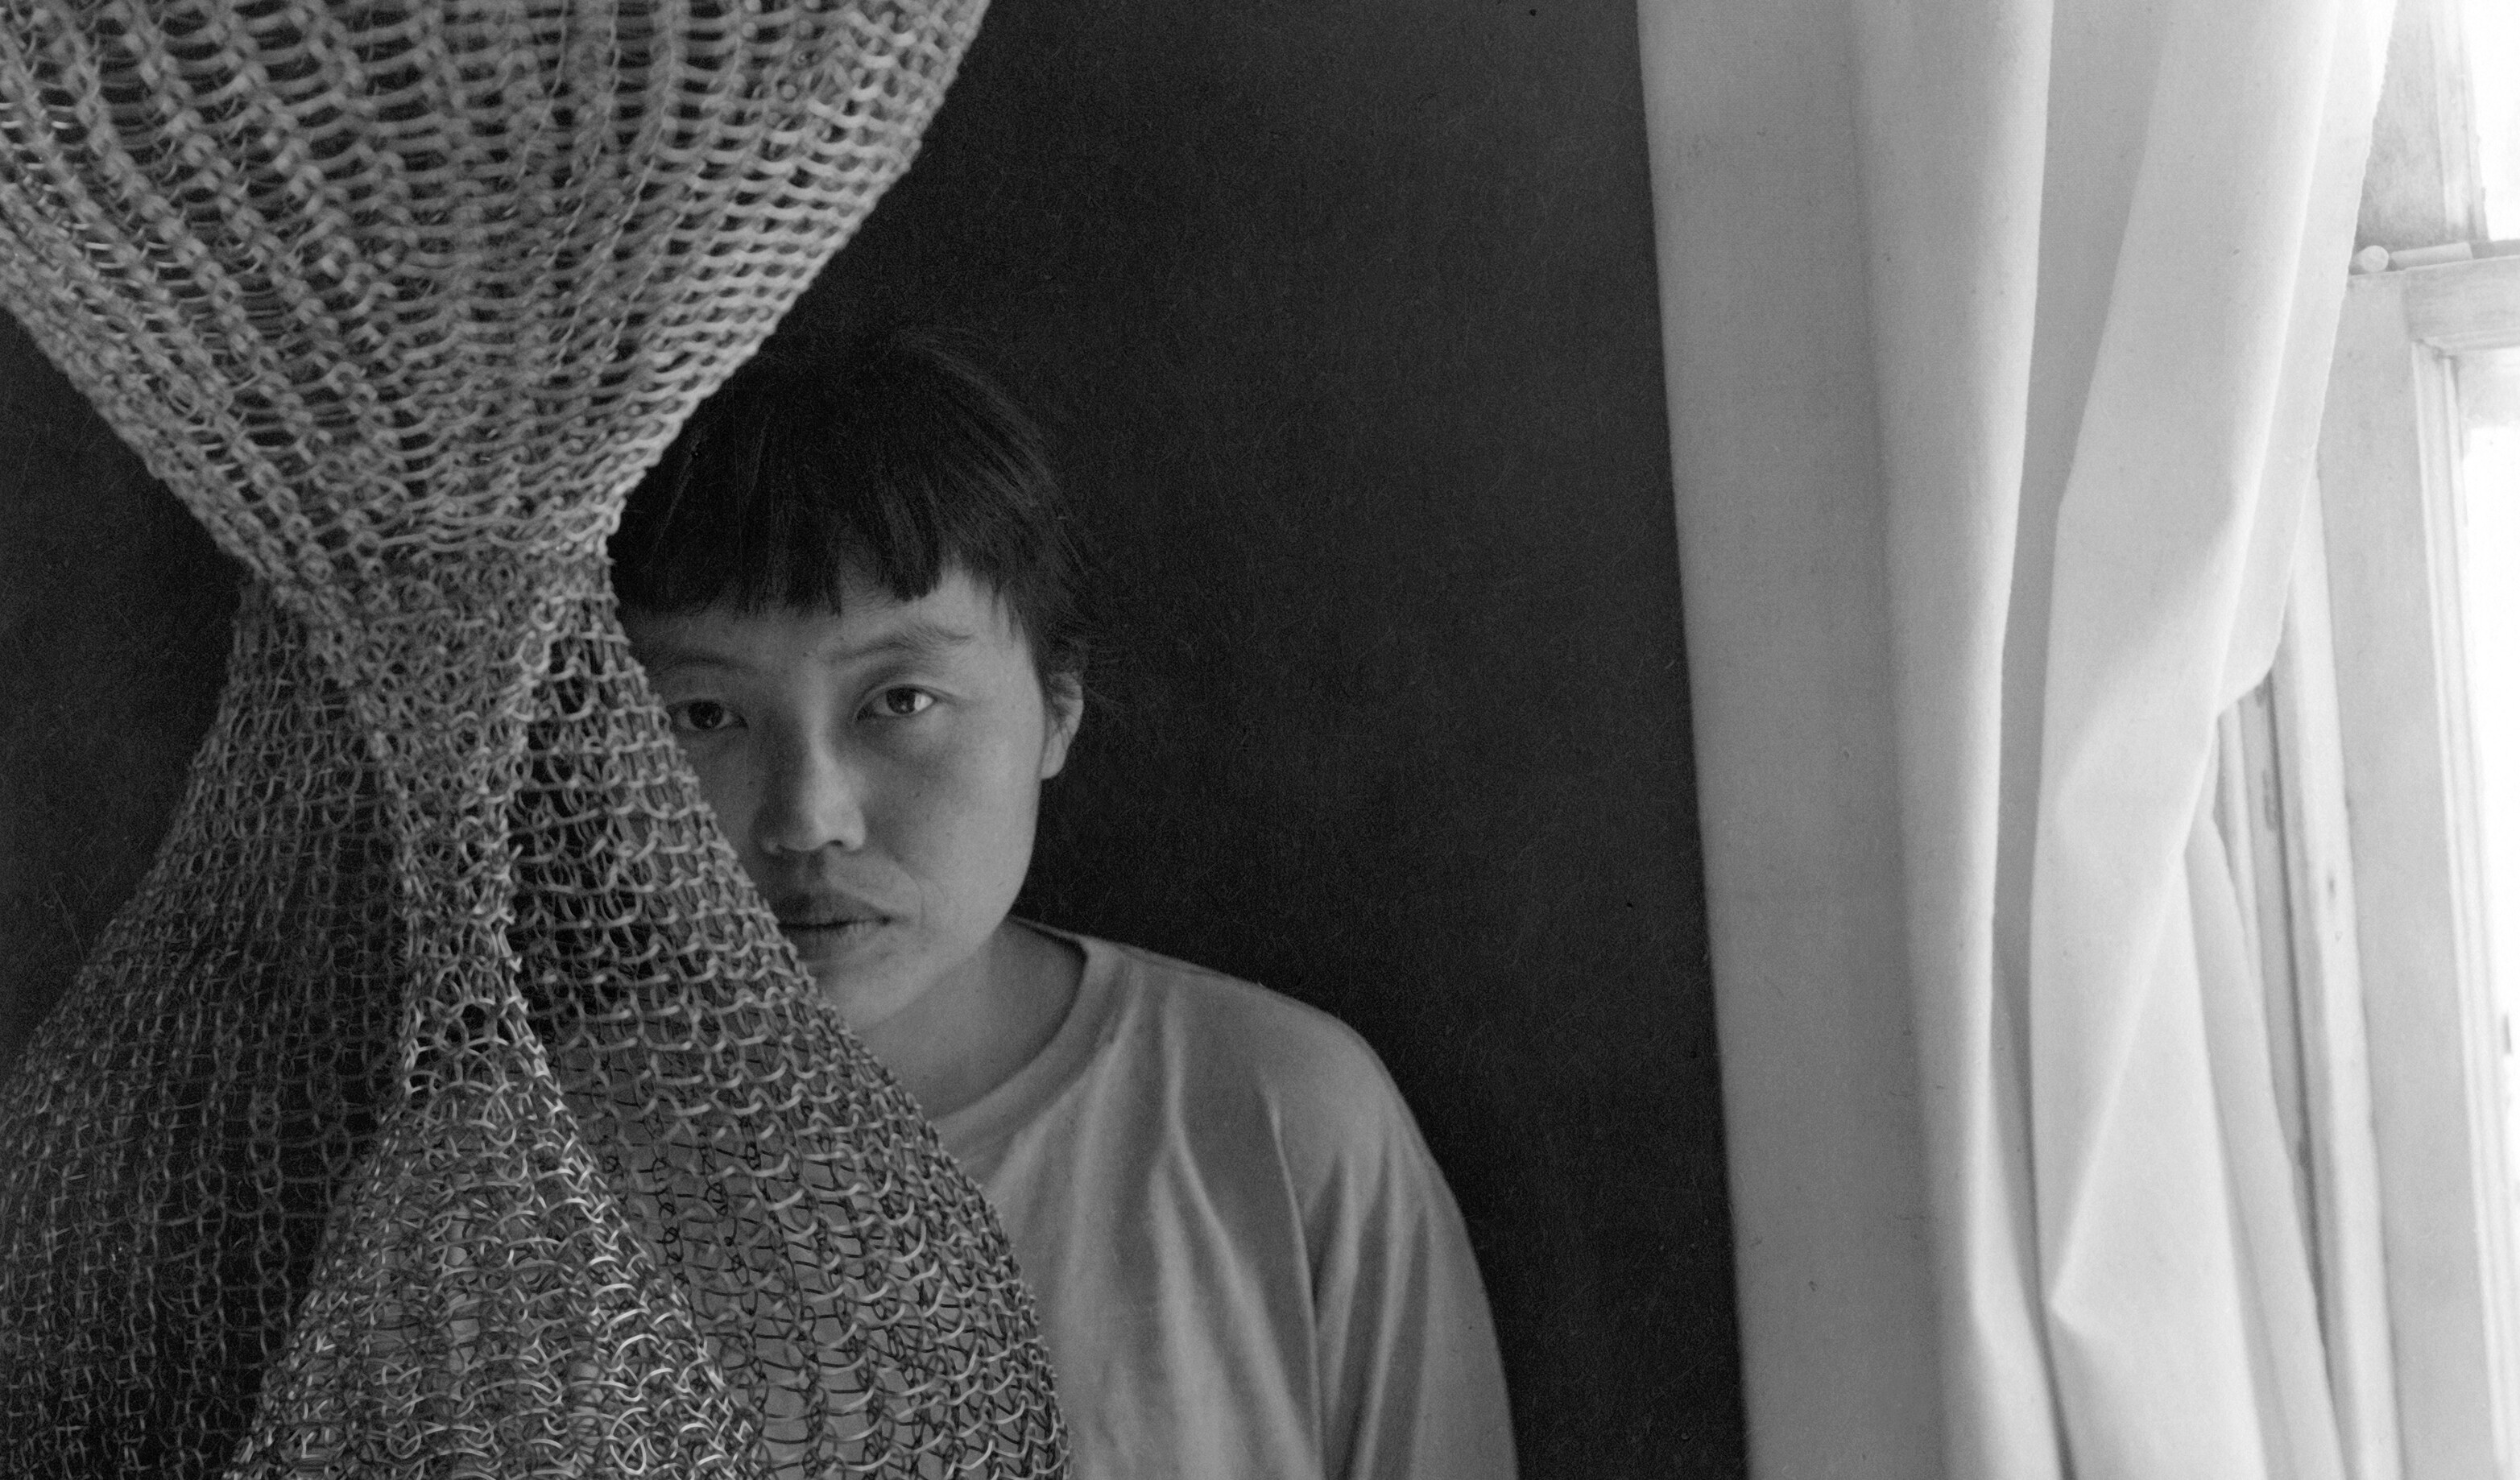 A detail of a photograph of Ruth Asawa, dated 1950s.